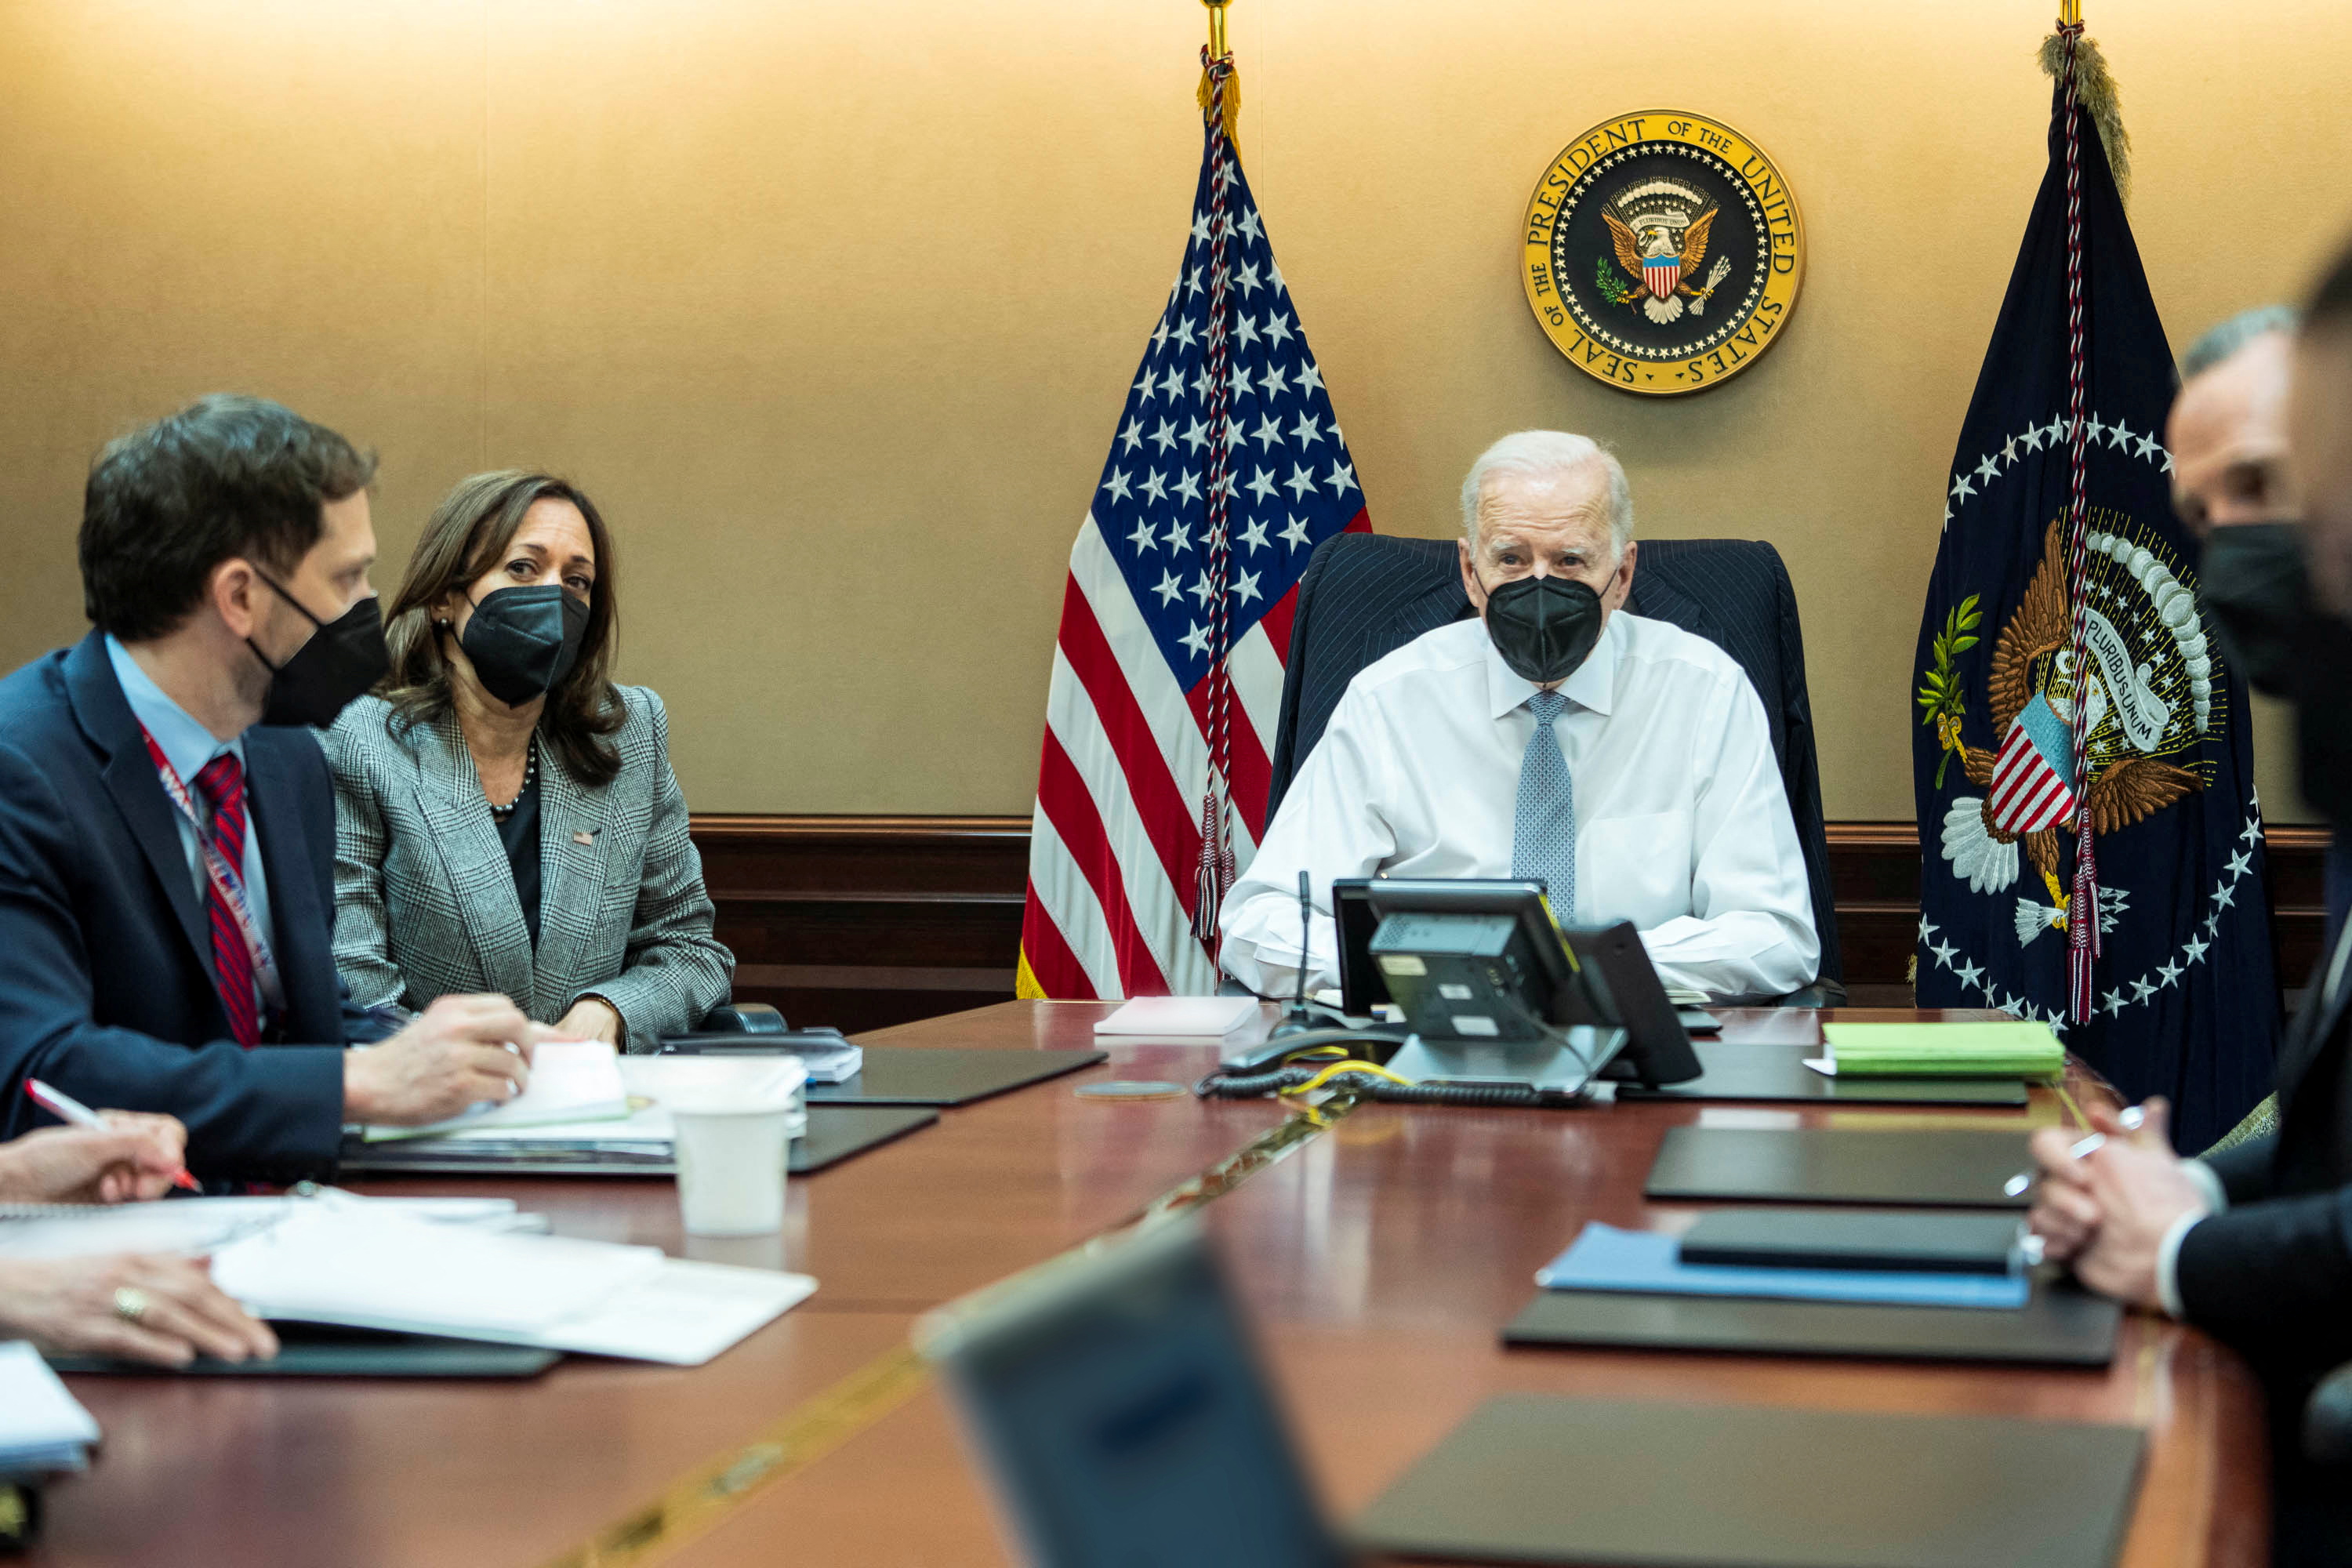 US President Joe Biden, Vice President Kamala Harris and other White House national security personnel are seen in a photo broadcast from the White House while viewing US Special Forces operations in Northern Syria against ISIS leader Abu Ibrahim al-Hashemi al-Quraishi from the Situation Room at the White House in Washington, US February 3.